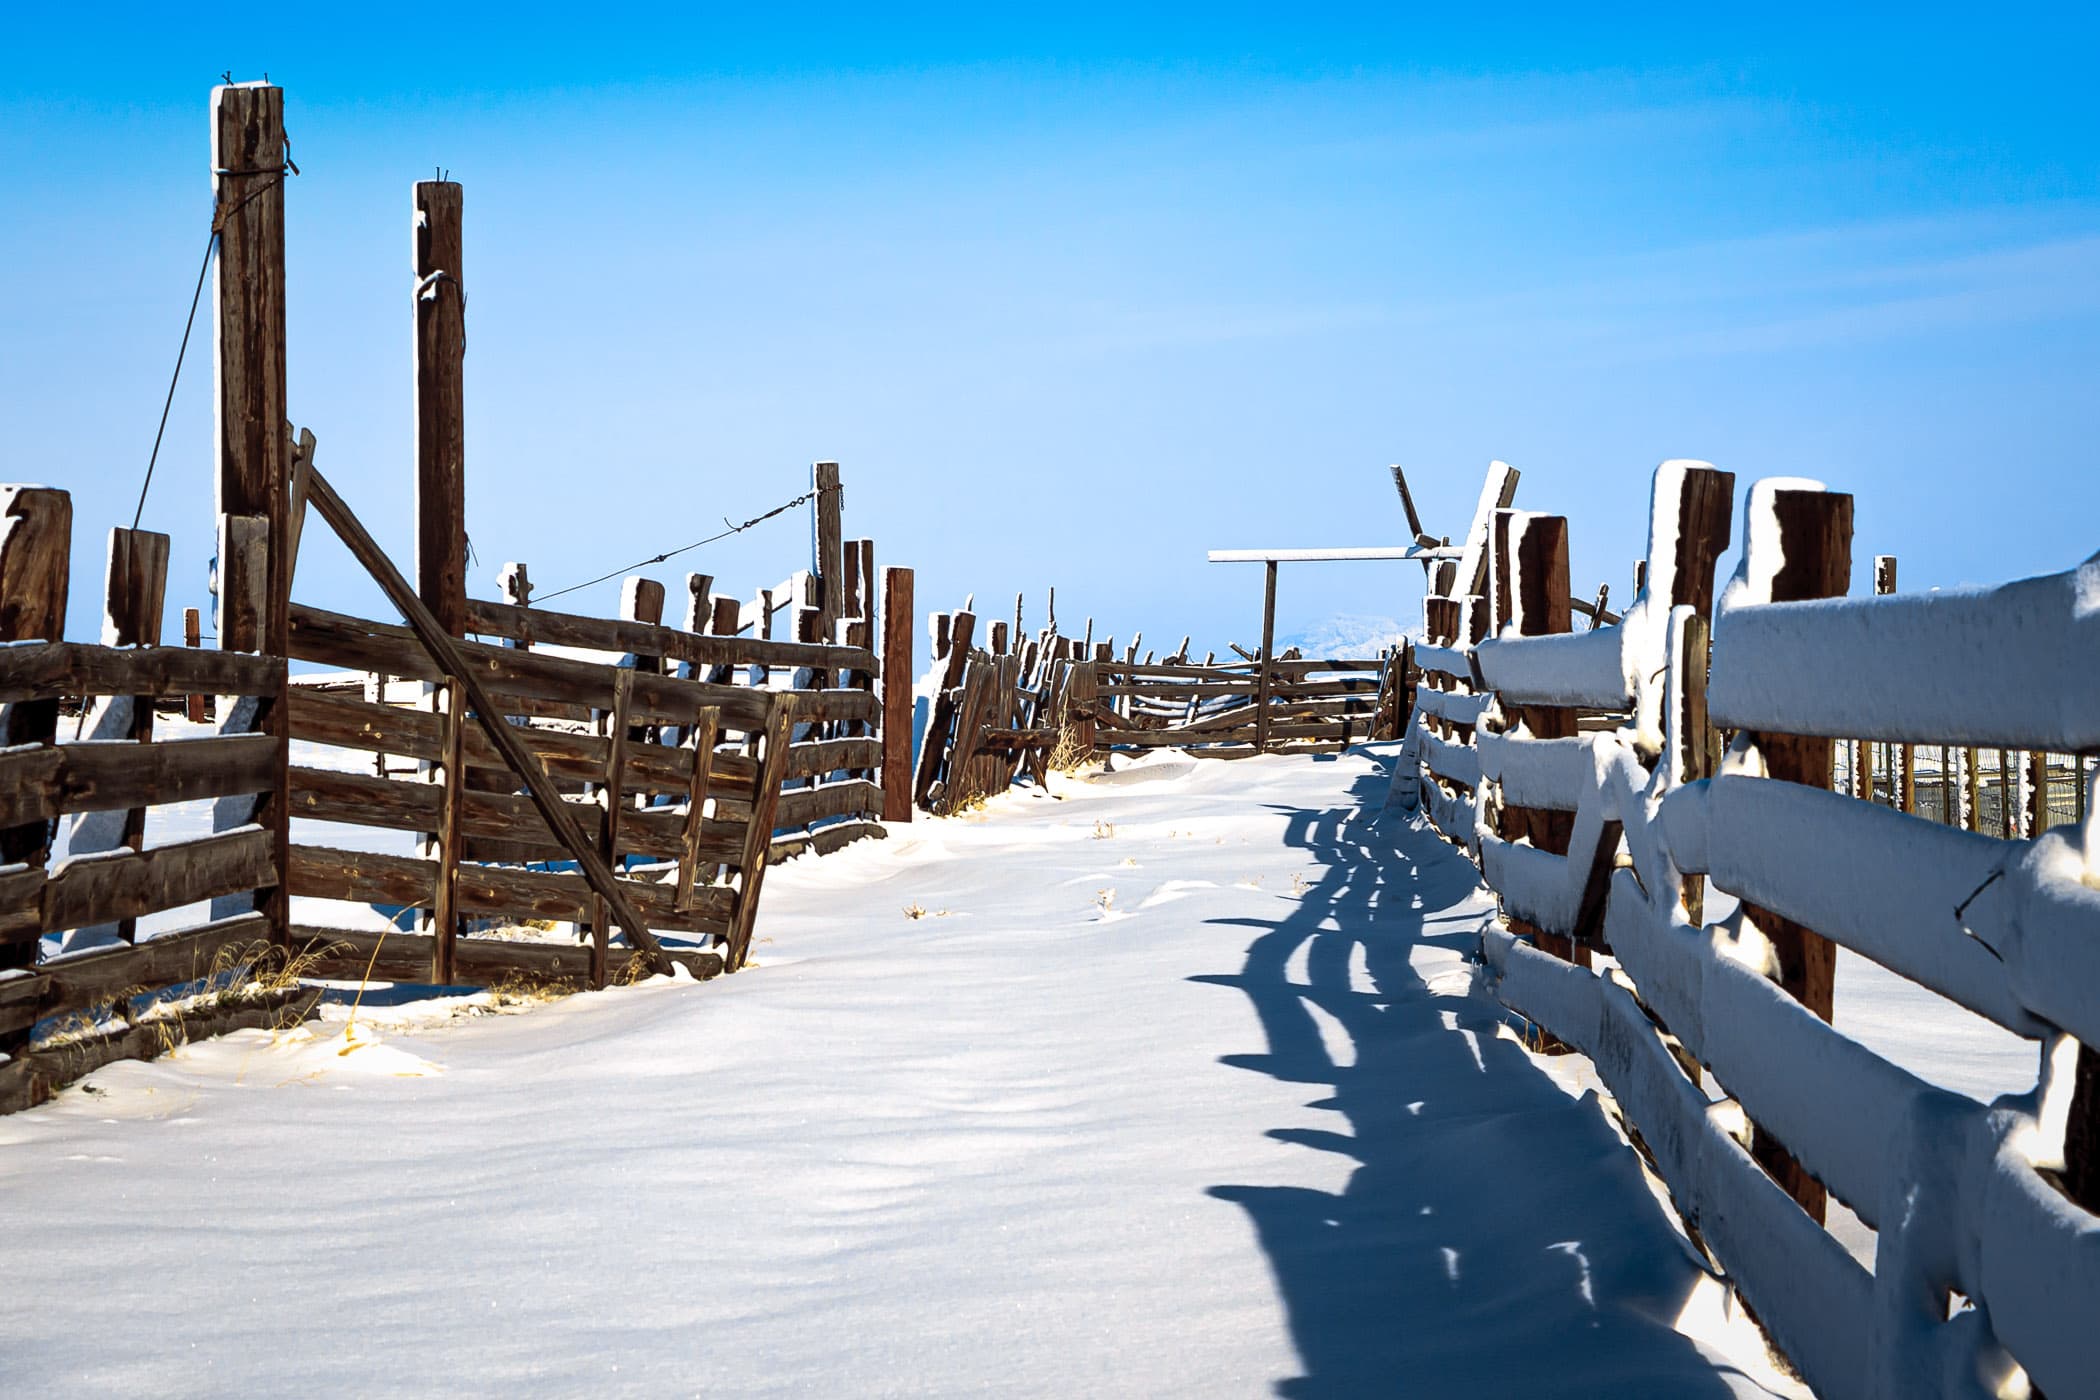 A very cold and snowy fence at Utah's Antelope Island State Park.